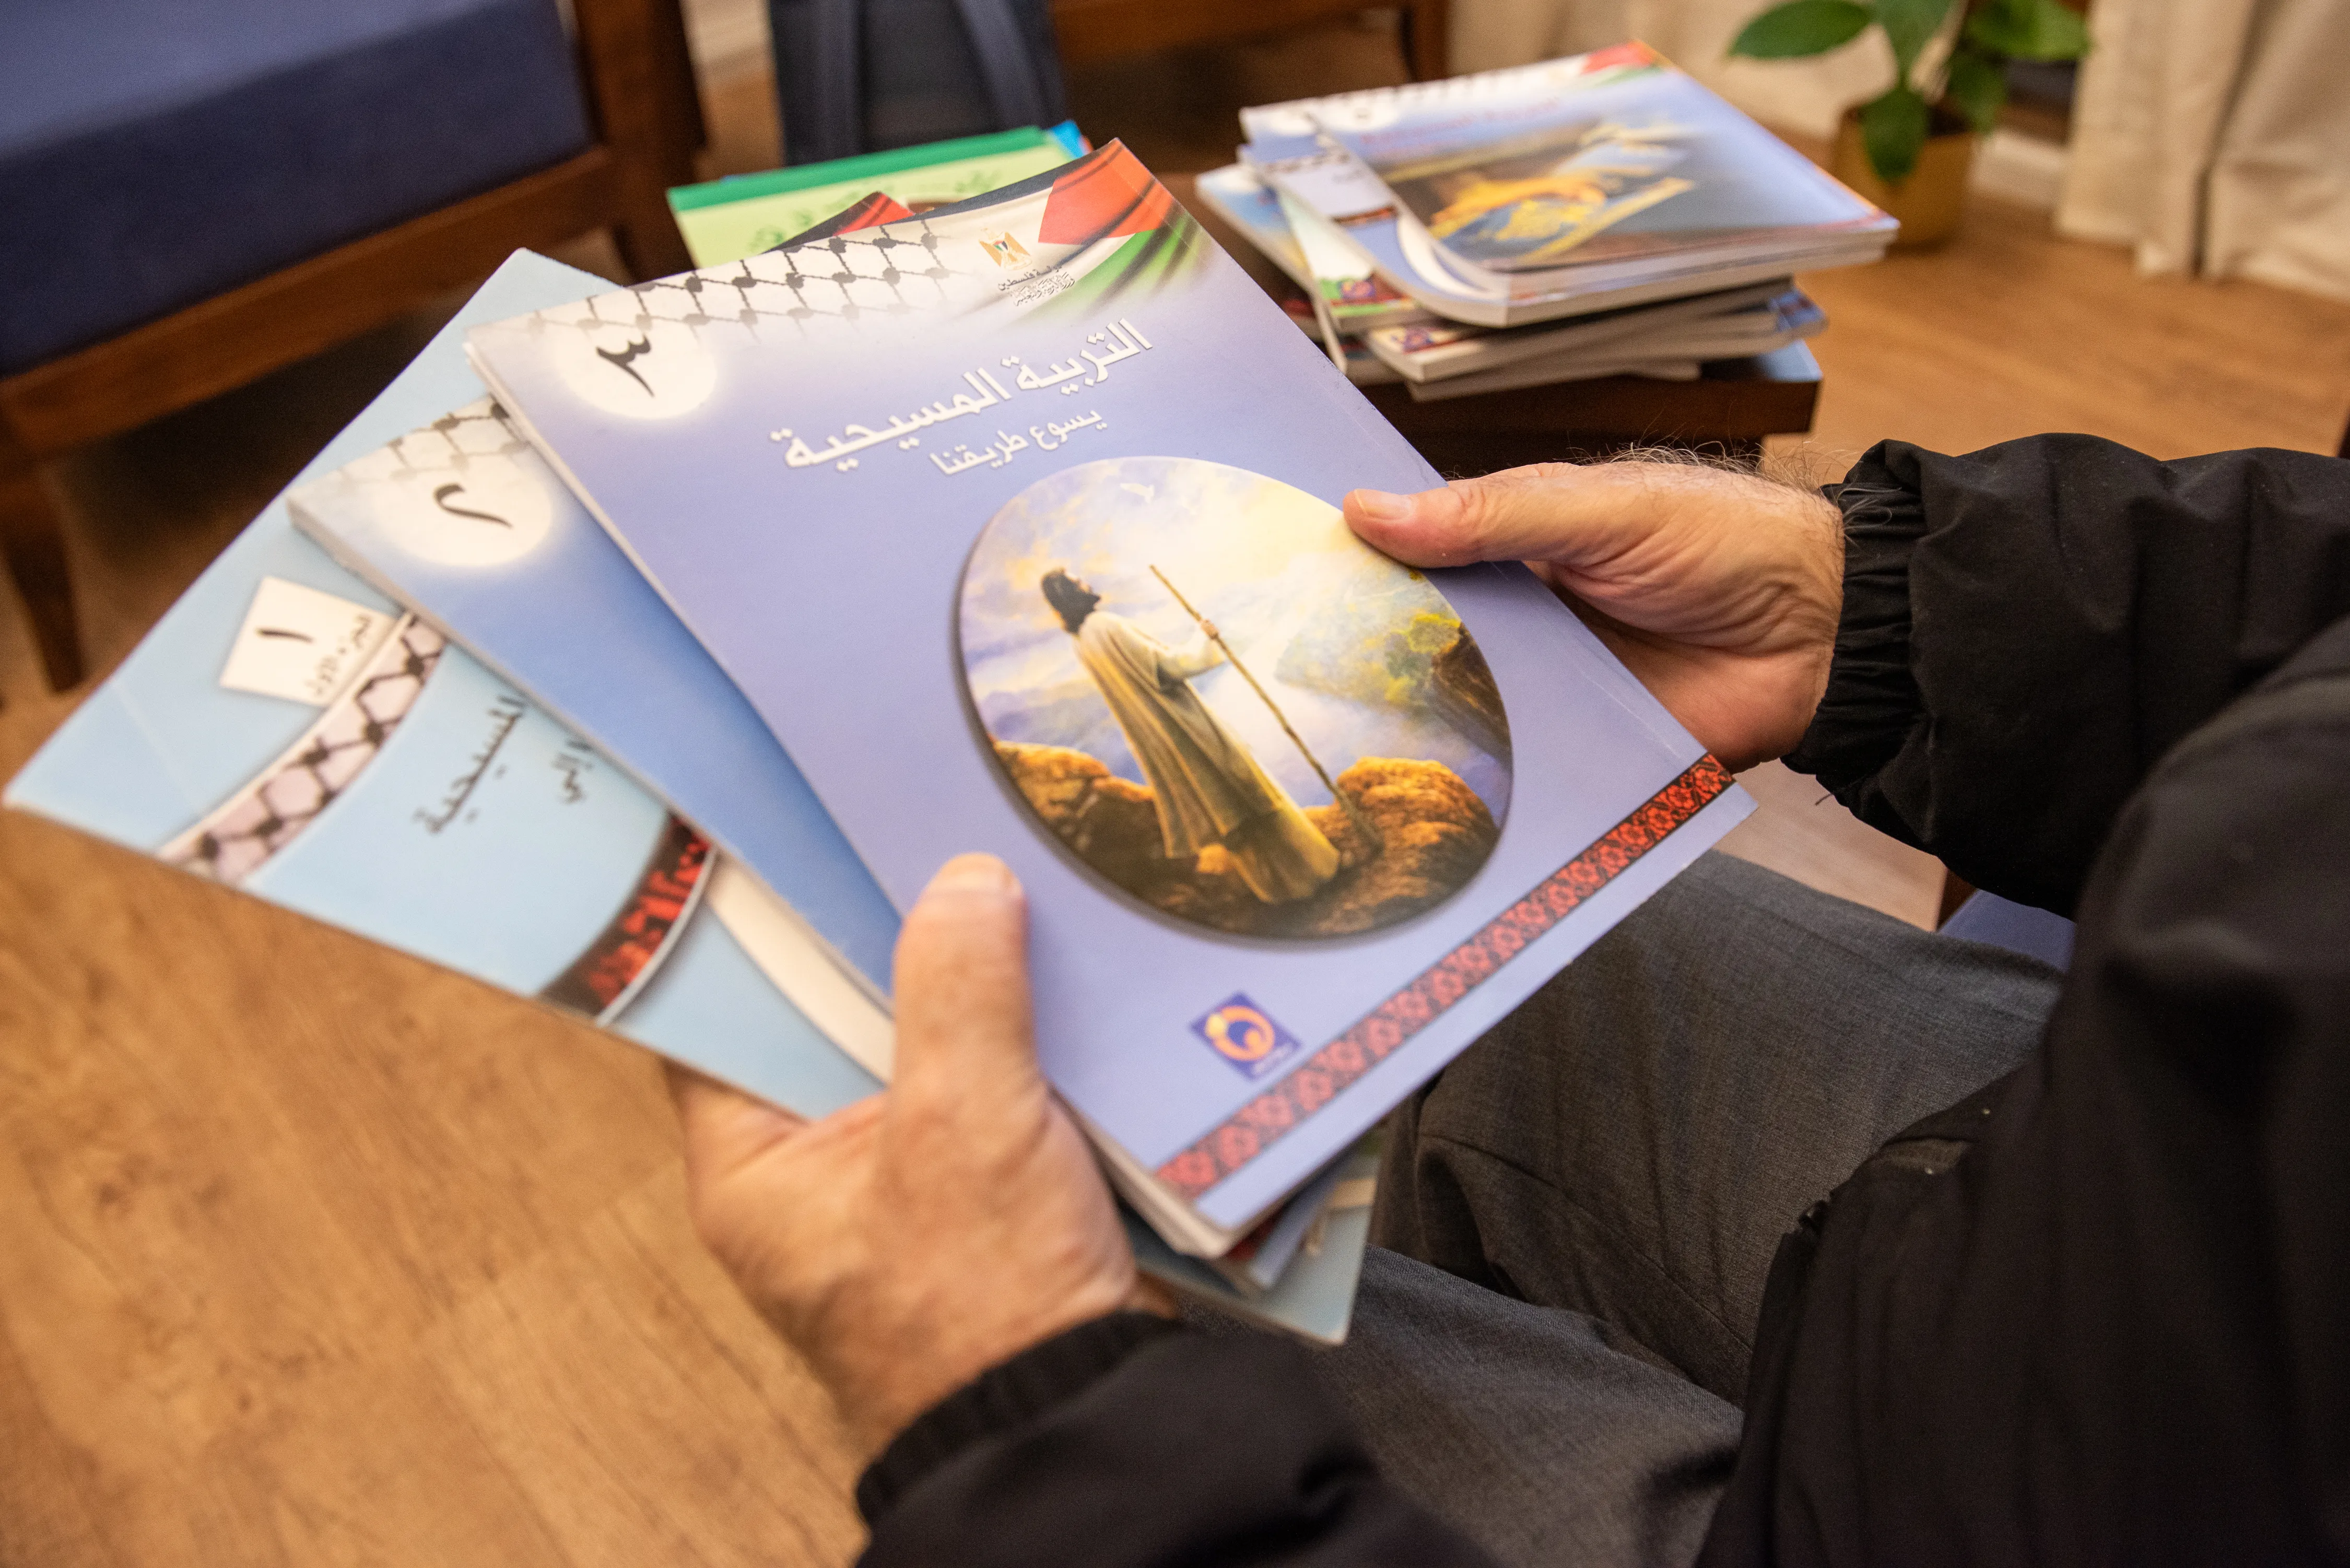 Father Rafiq Khoury at the beginning of the 2024 Week of Prayer for Christian Unity shows the first three volumes of the "ecumenical catechism" that was adopted in 2000 by public schools of the Palestinian Authority as a textbook for Christian education.?w=200&h=150